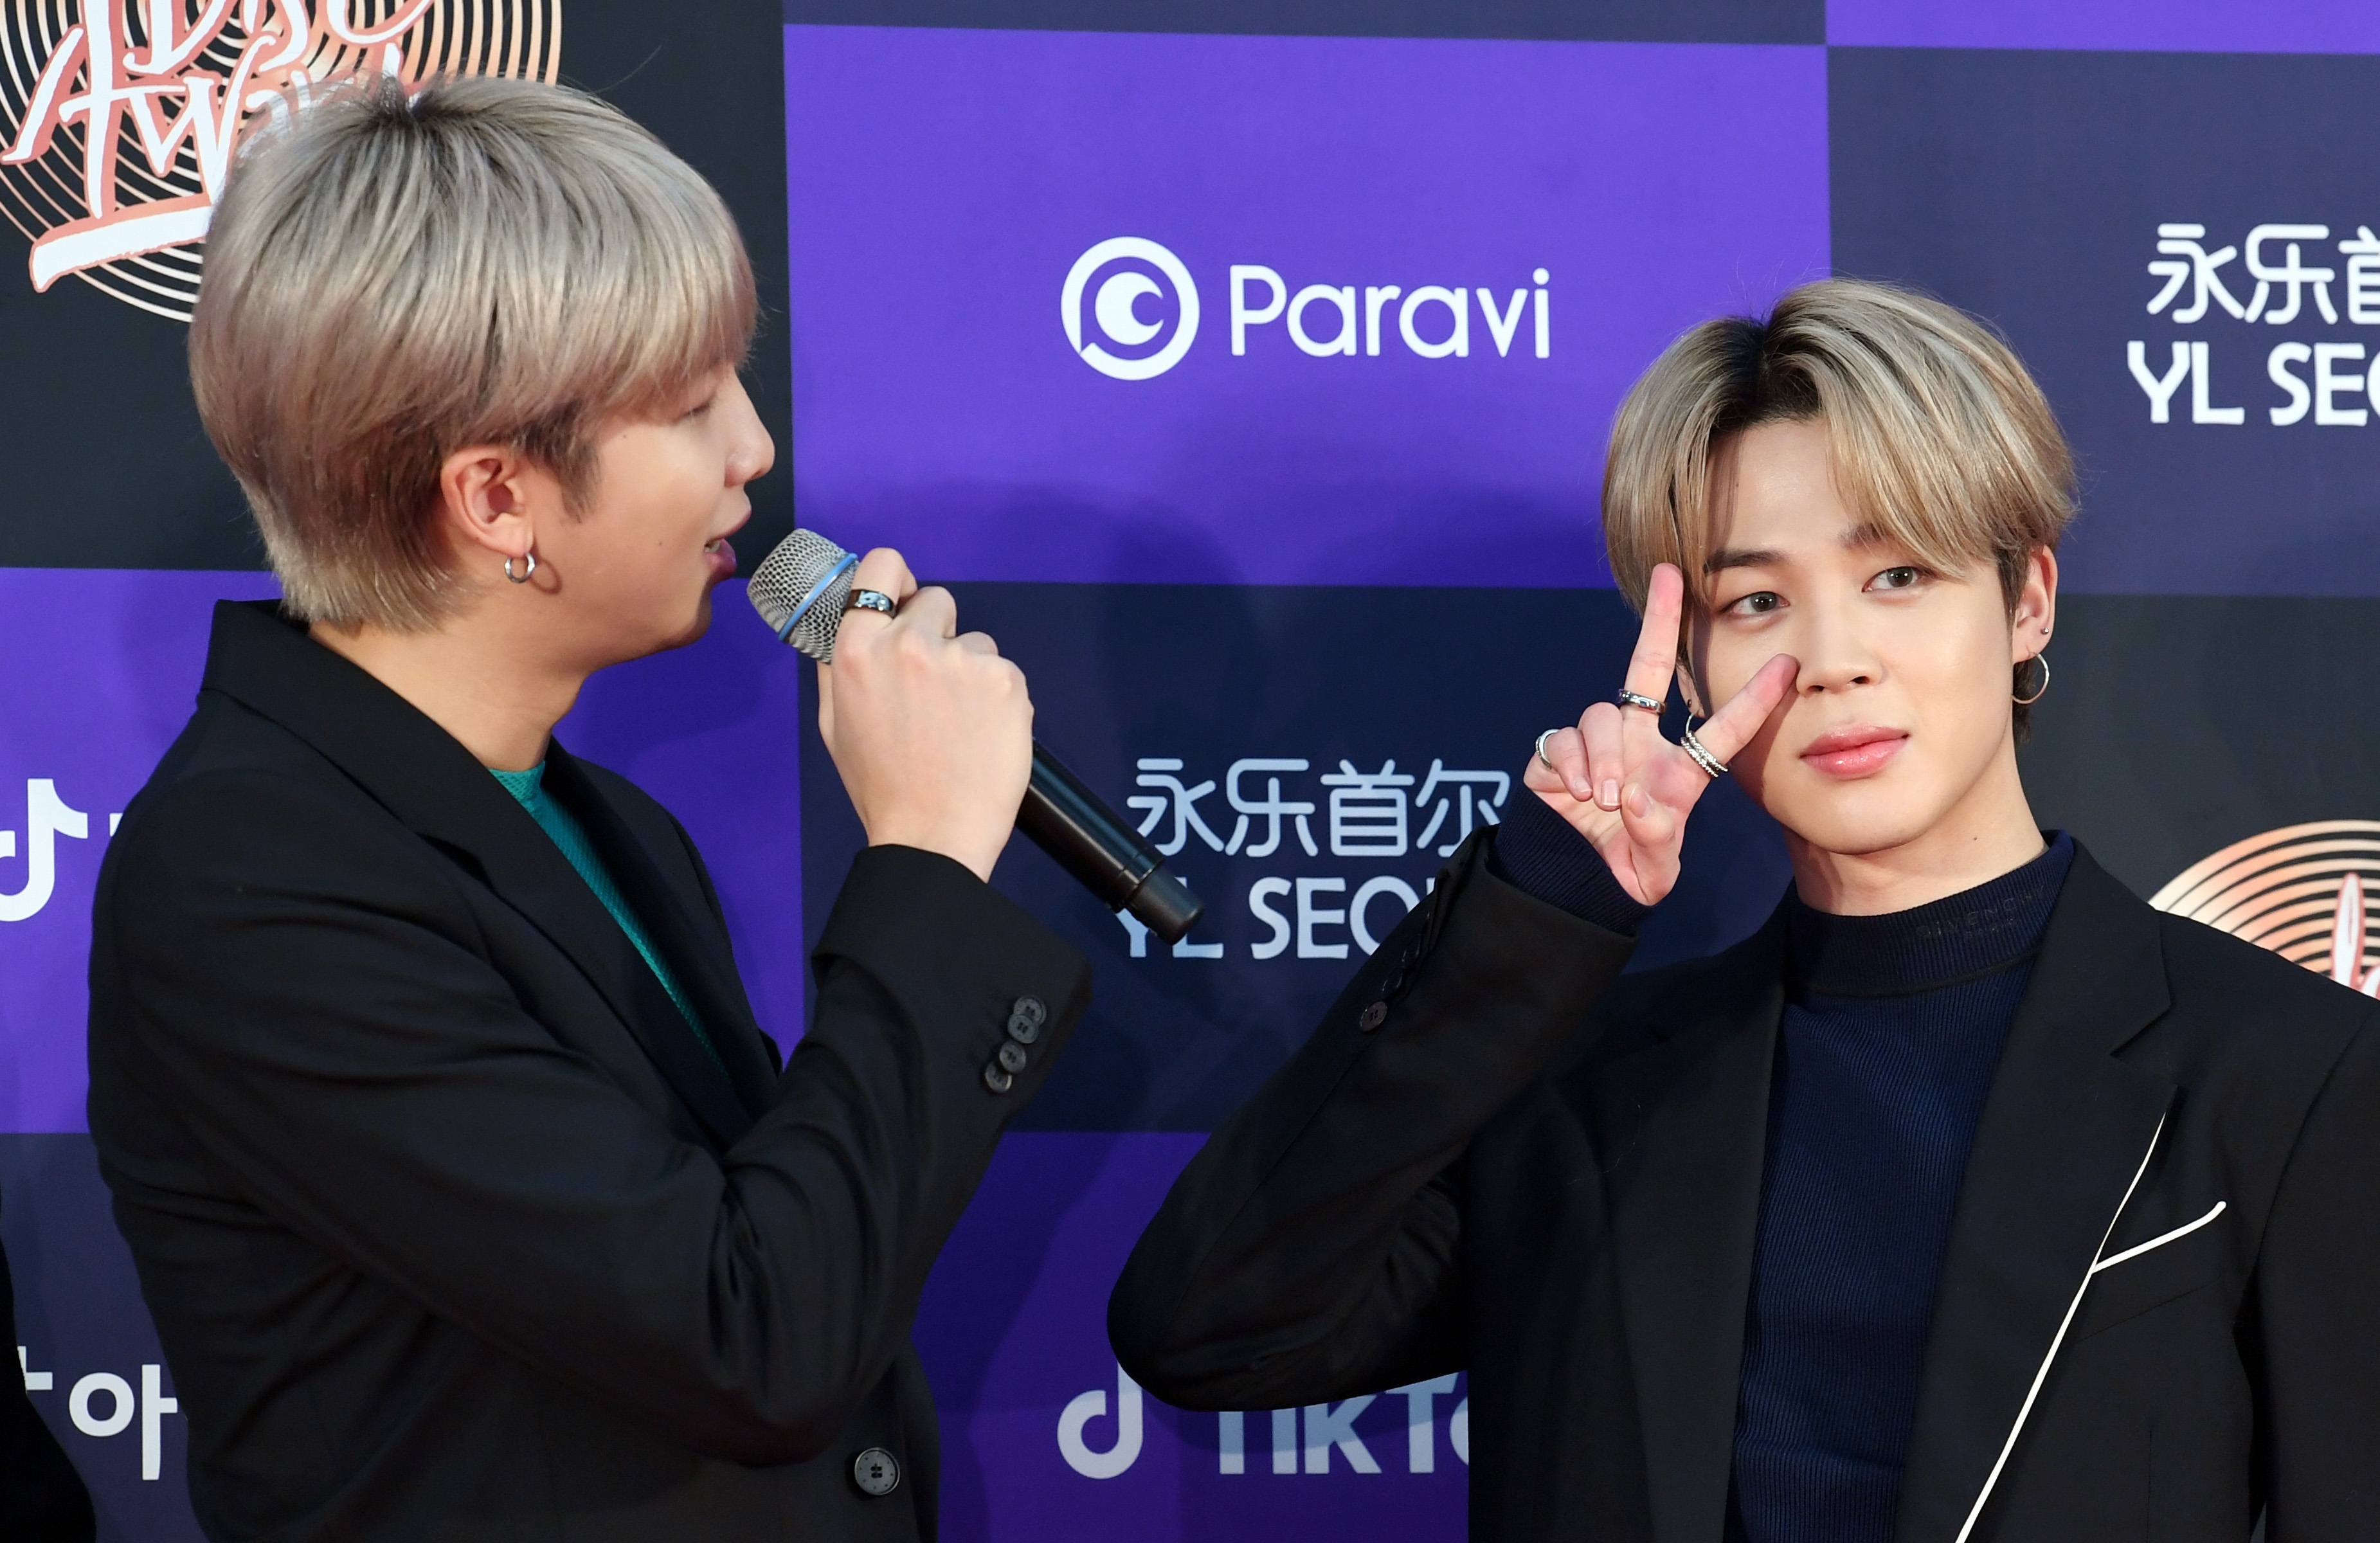 Bts' Jimin Wore A Sweater Worth Over $100 For The 'Boy With Luv' Music Video